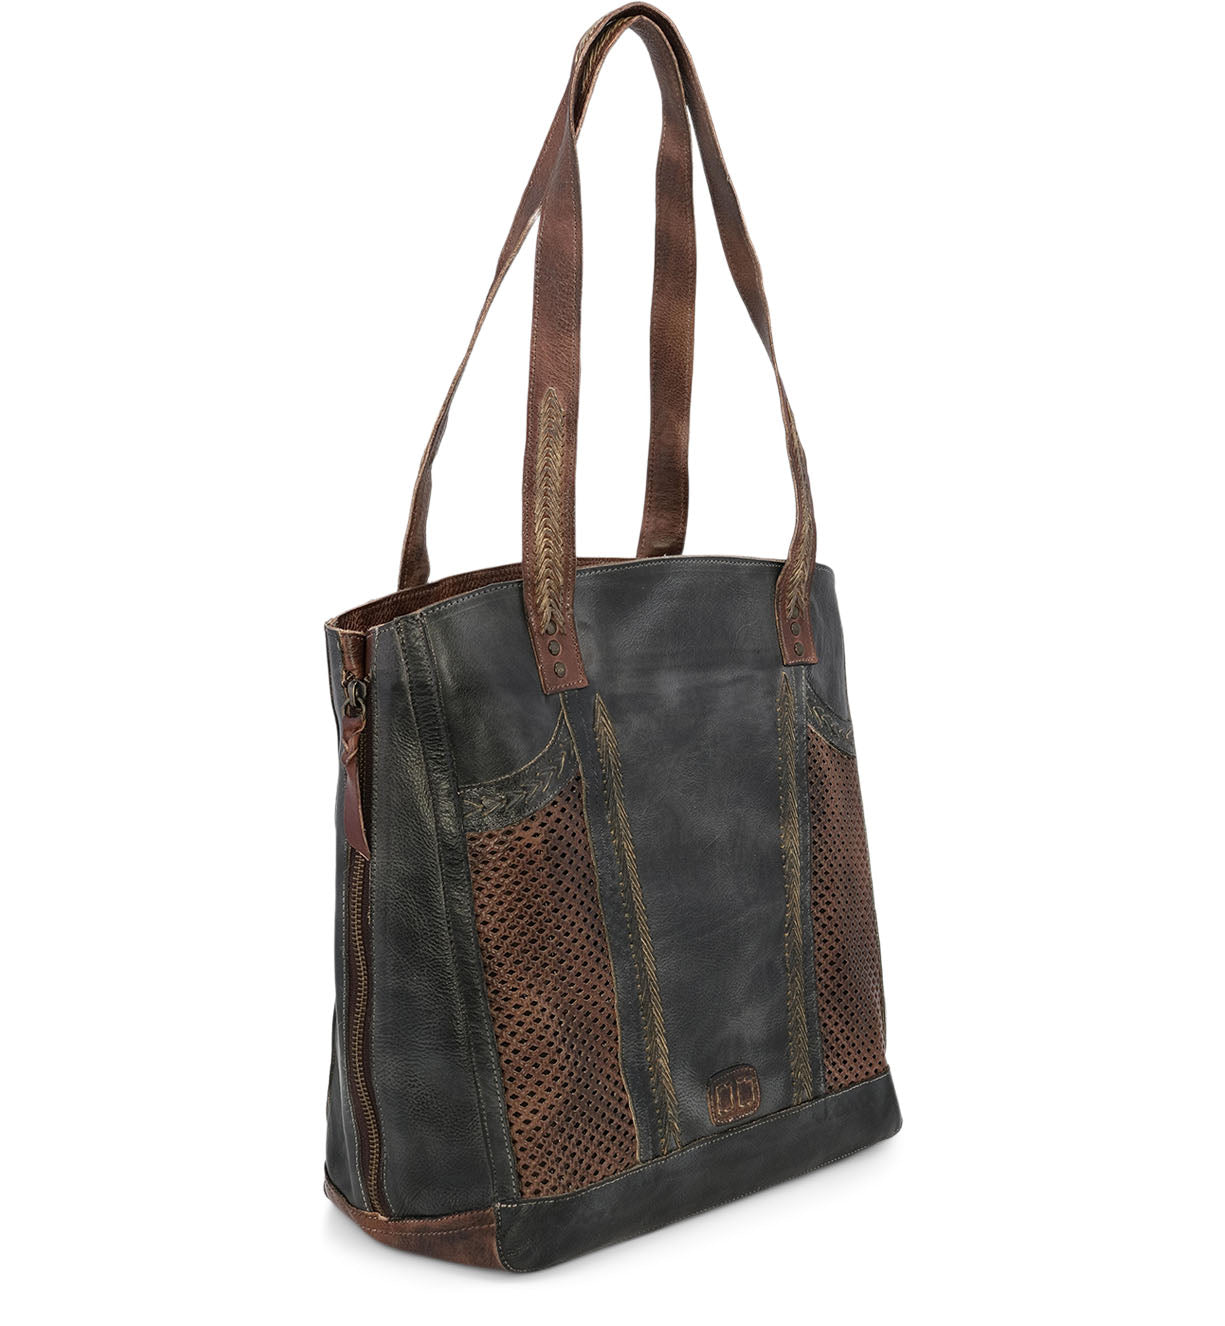 The Amelie women's leather tote bag by Bed Stu in black and brown color.